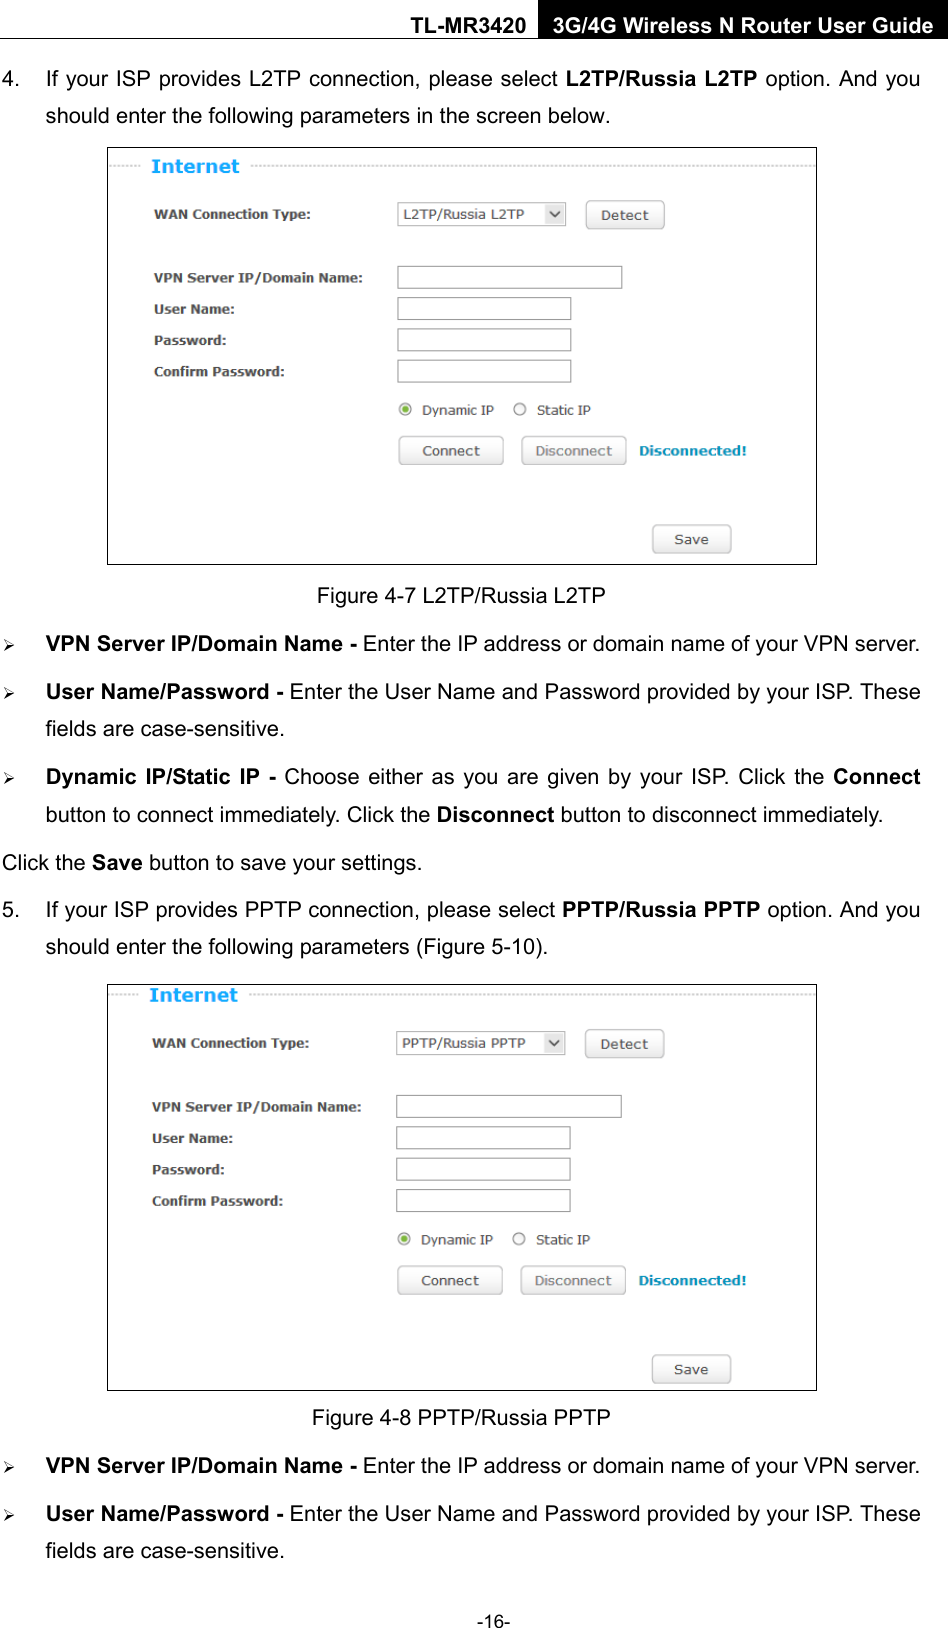    -16- TL-MR3420 3G/4G Wireless N Router User Guide 4. If your ISP provides L2TP connection, please select L2TP/Russia L2TP option. And you should enter the following parameters in the screen below.  Figure 4-7 L2TP/Russia L2TP  VPN Server IP/Domain Name - Enter the IP address or domain name of your VPN server.  User Name/Password - Enter the User Name and Password provided by your ISP. These fields are case-sensitive.  Dynamic IP/Static IP  - Choose either as you are given by your ISP. Click the Connect button to connect immediately. Click the Disconnect button to disconnect immediately. Click the Save button to save your settings. 5. If your ISP provides PPTP connection, please select PPTP/Russia PPTP option. And you should enter the following parameters (Figure 5-10).  Figure 4-8 PPTP/Russia PPTP  VPN Server IP/Domain Name - Enter the IP address or domain name of your VPN server.  User Name/Password - Enter the User Name and Password provided by your ISP. These fields are case-sensitive. 